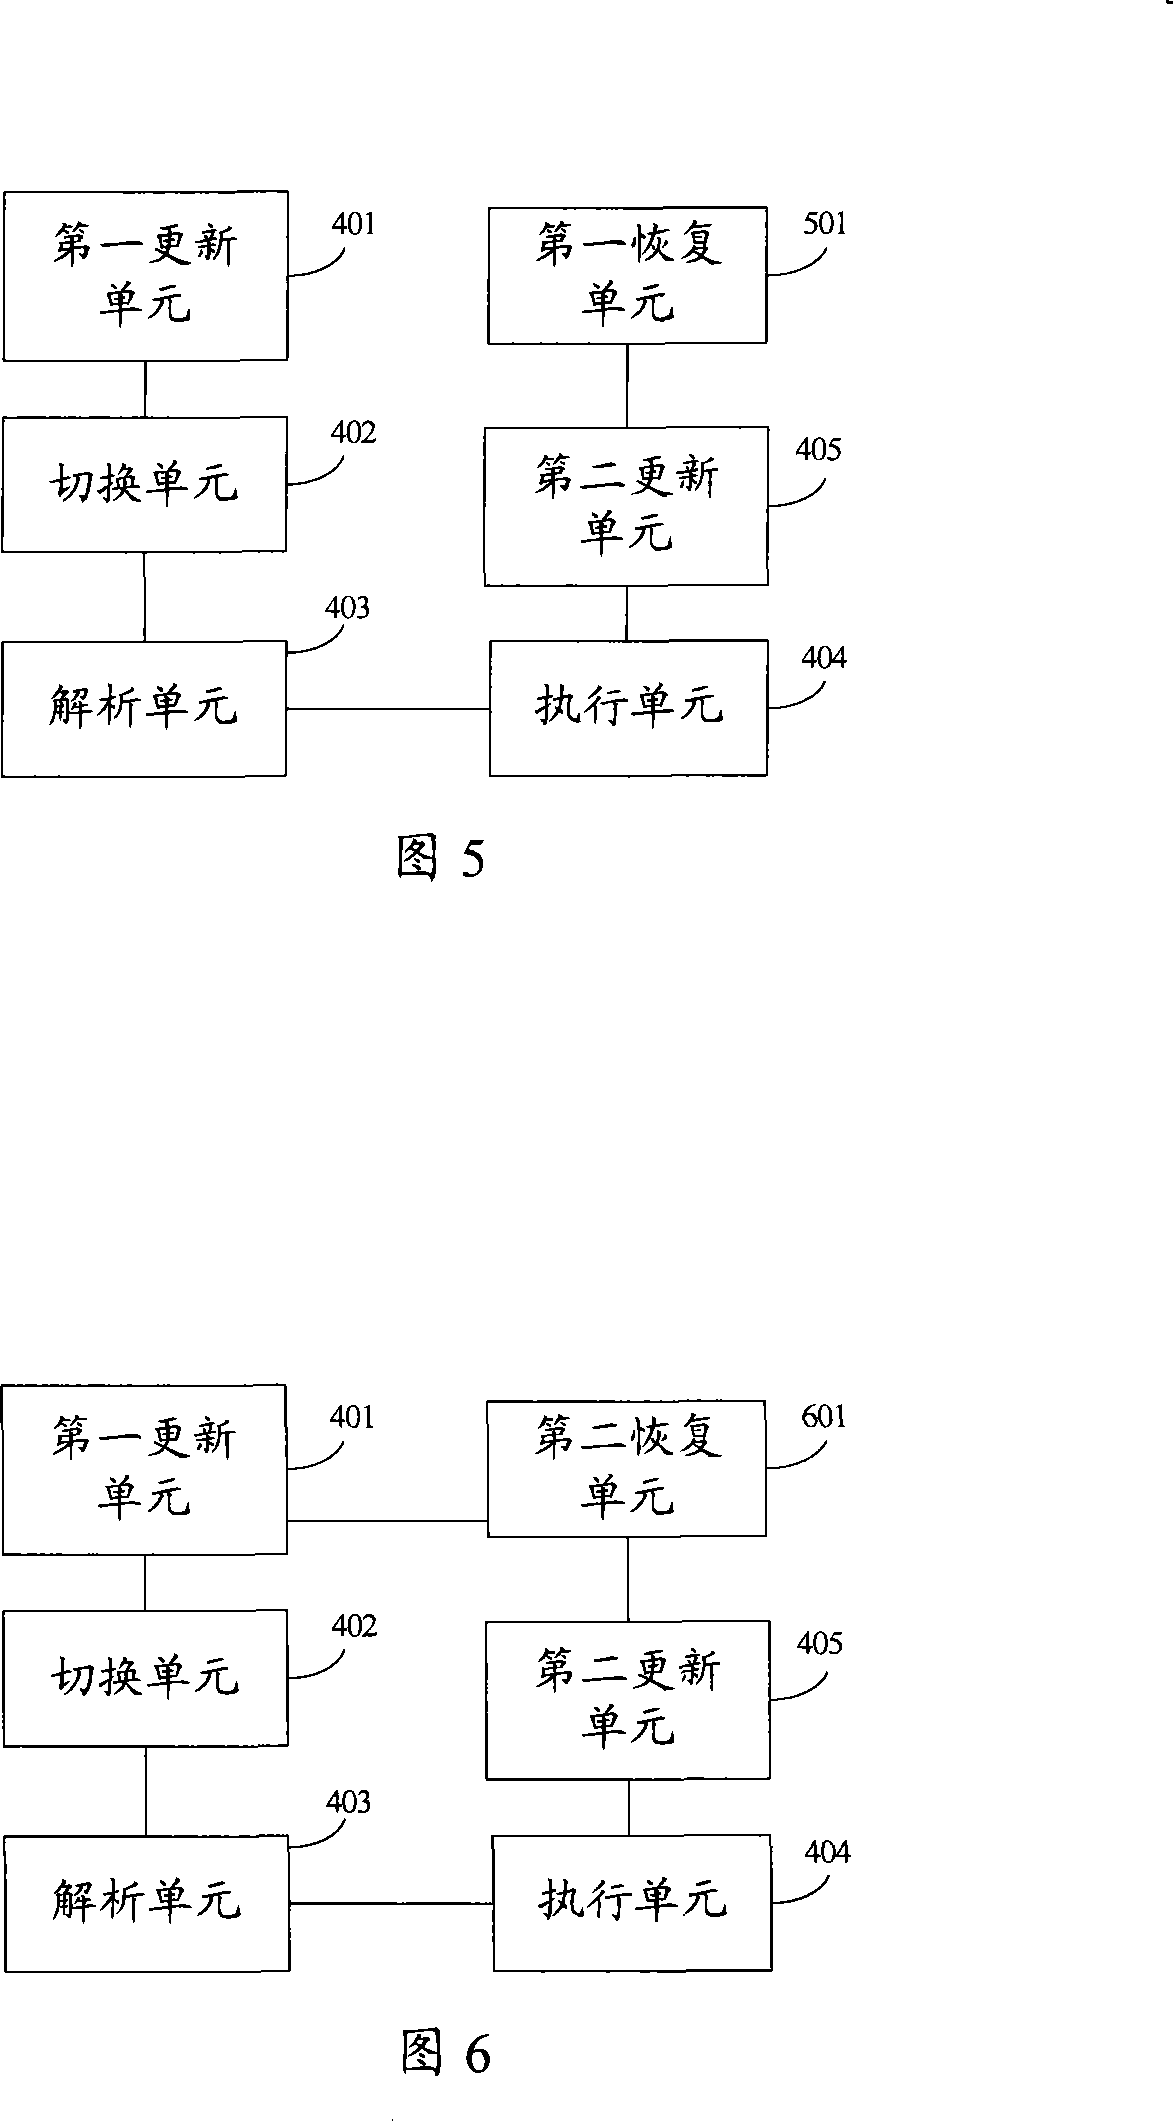 Method and apparatus for implementing preactivation of batch configuration